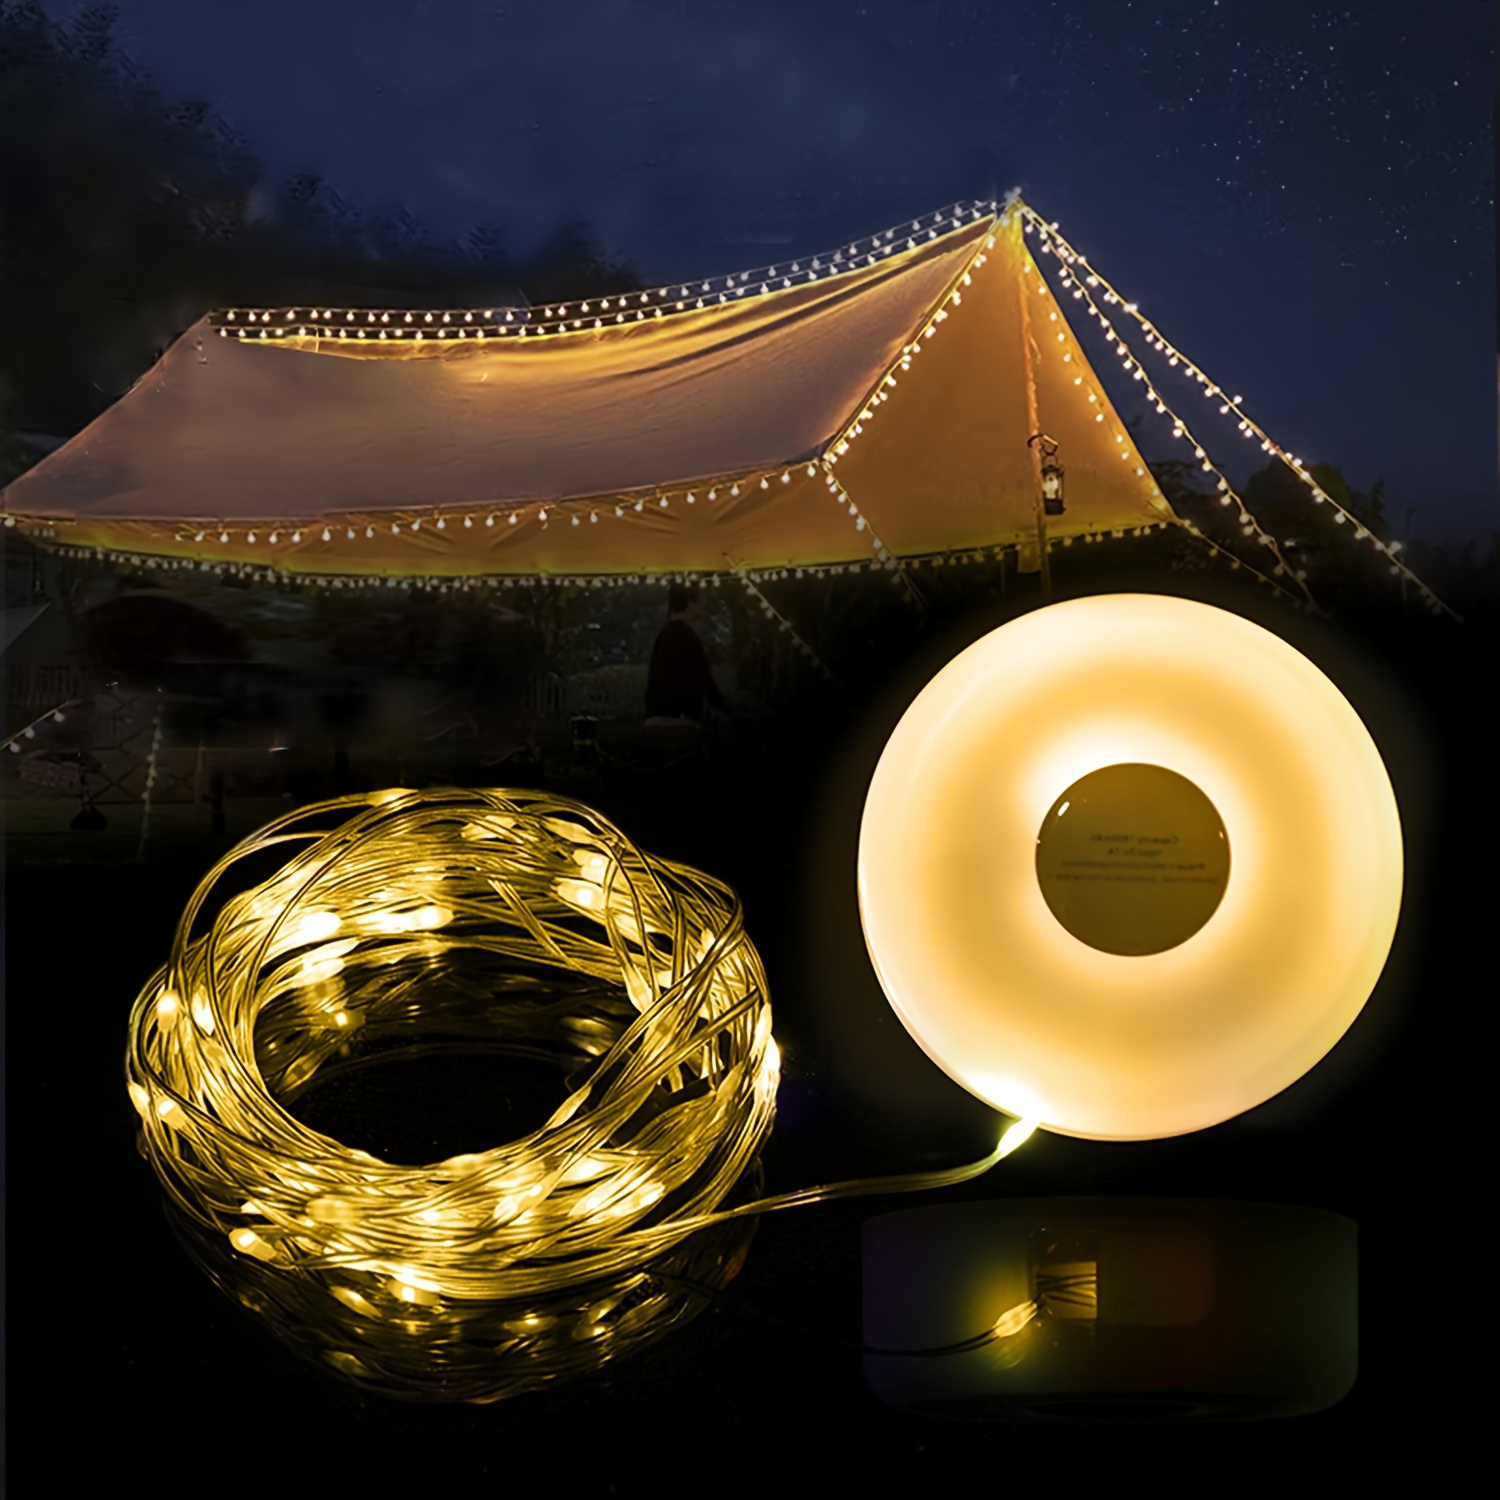 10m Waterproof String Light For Hiking And Camping Outdoor Canopy